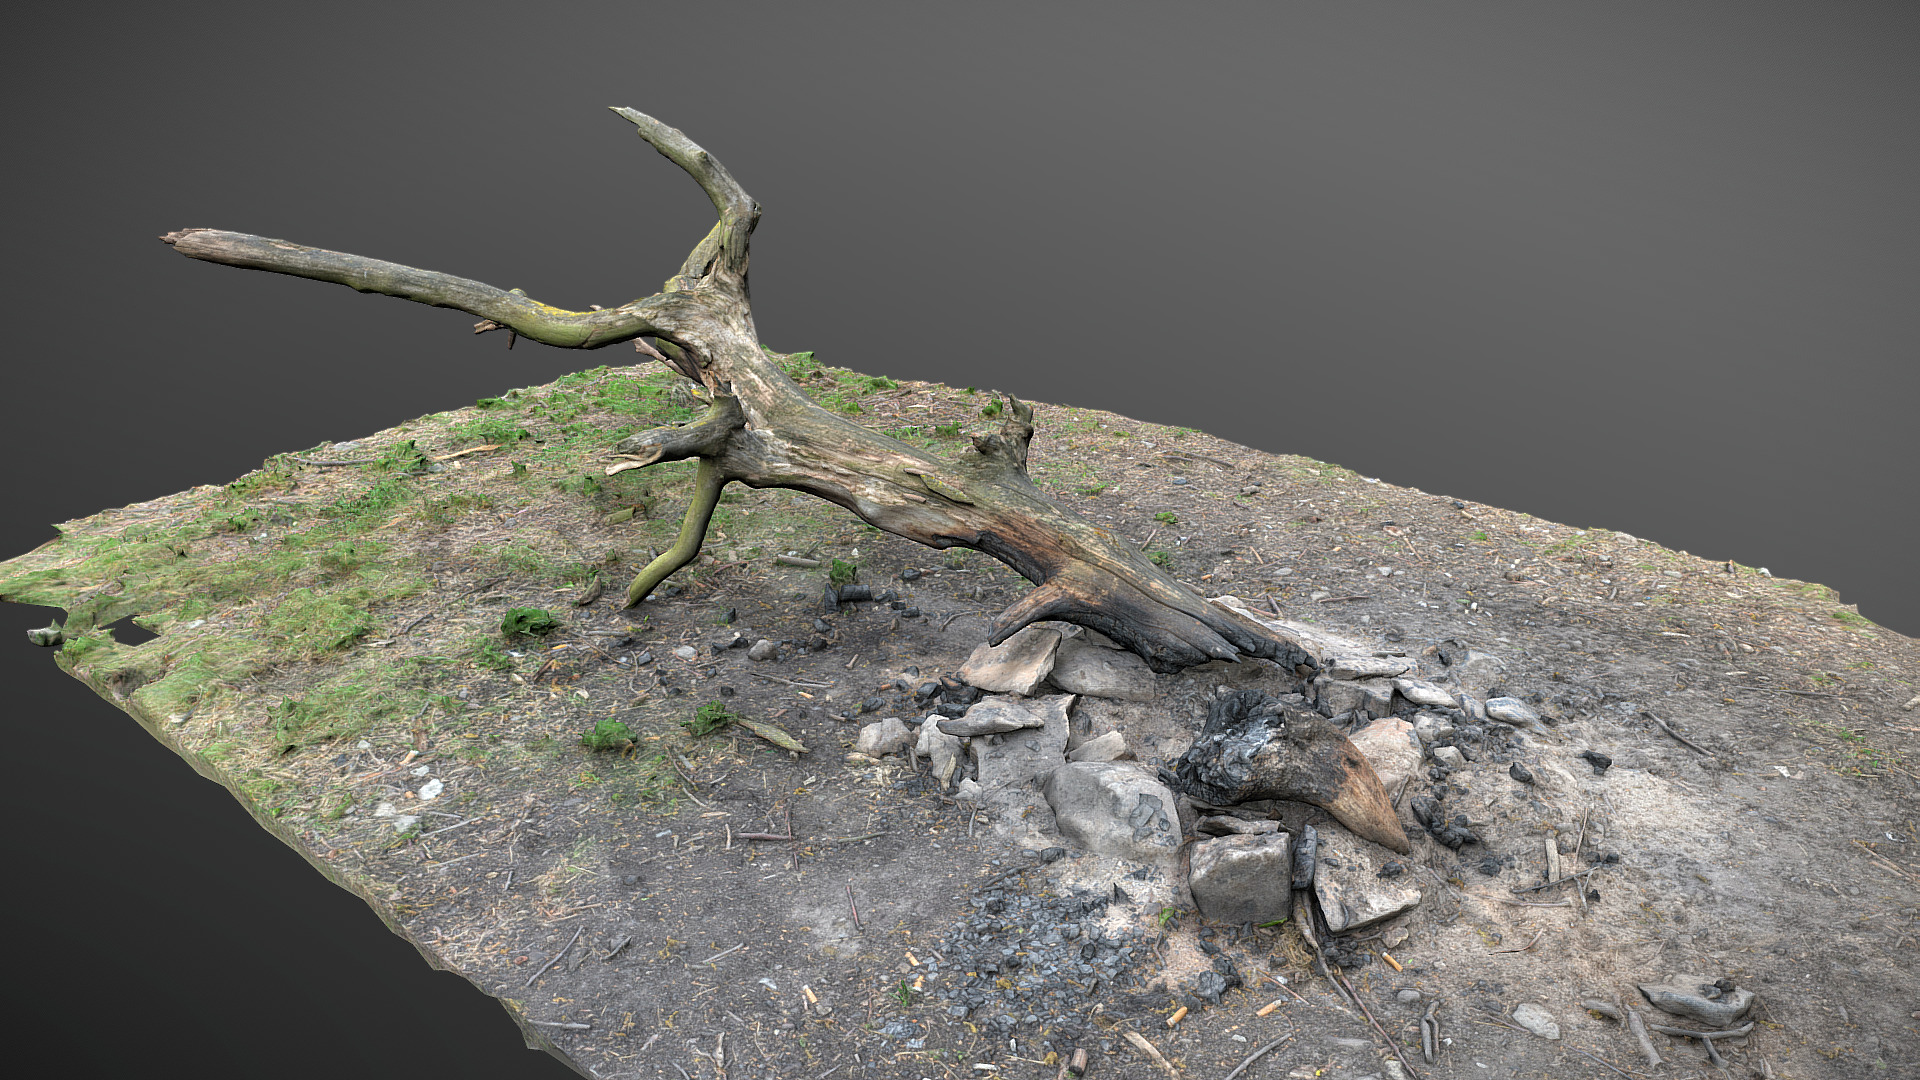 3D model Fireplace burned log tree #EarthDay2020Challenge - This is a 3D model of the Fireplace burned log tree #EarthDay2020Challenge. The 3D model is about a tree branch in a pond.